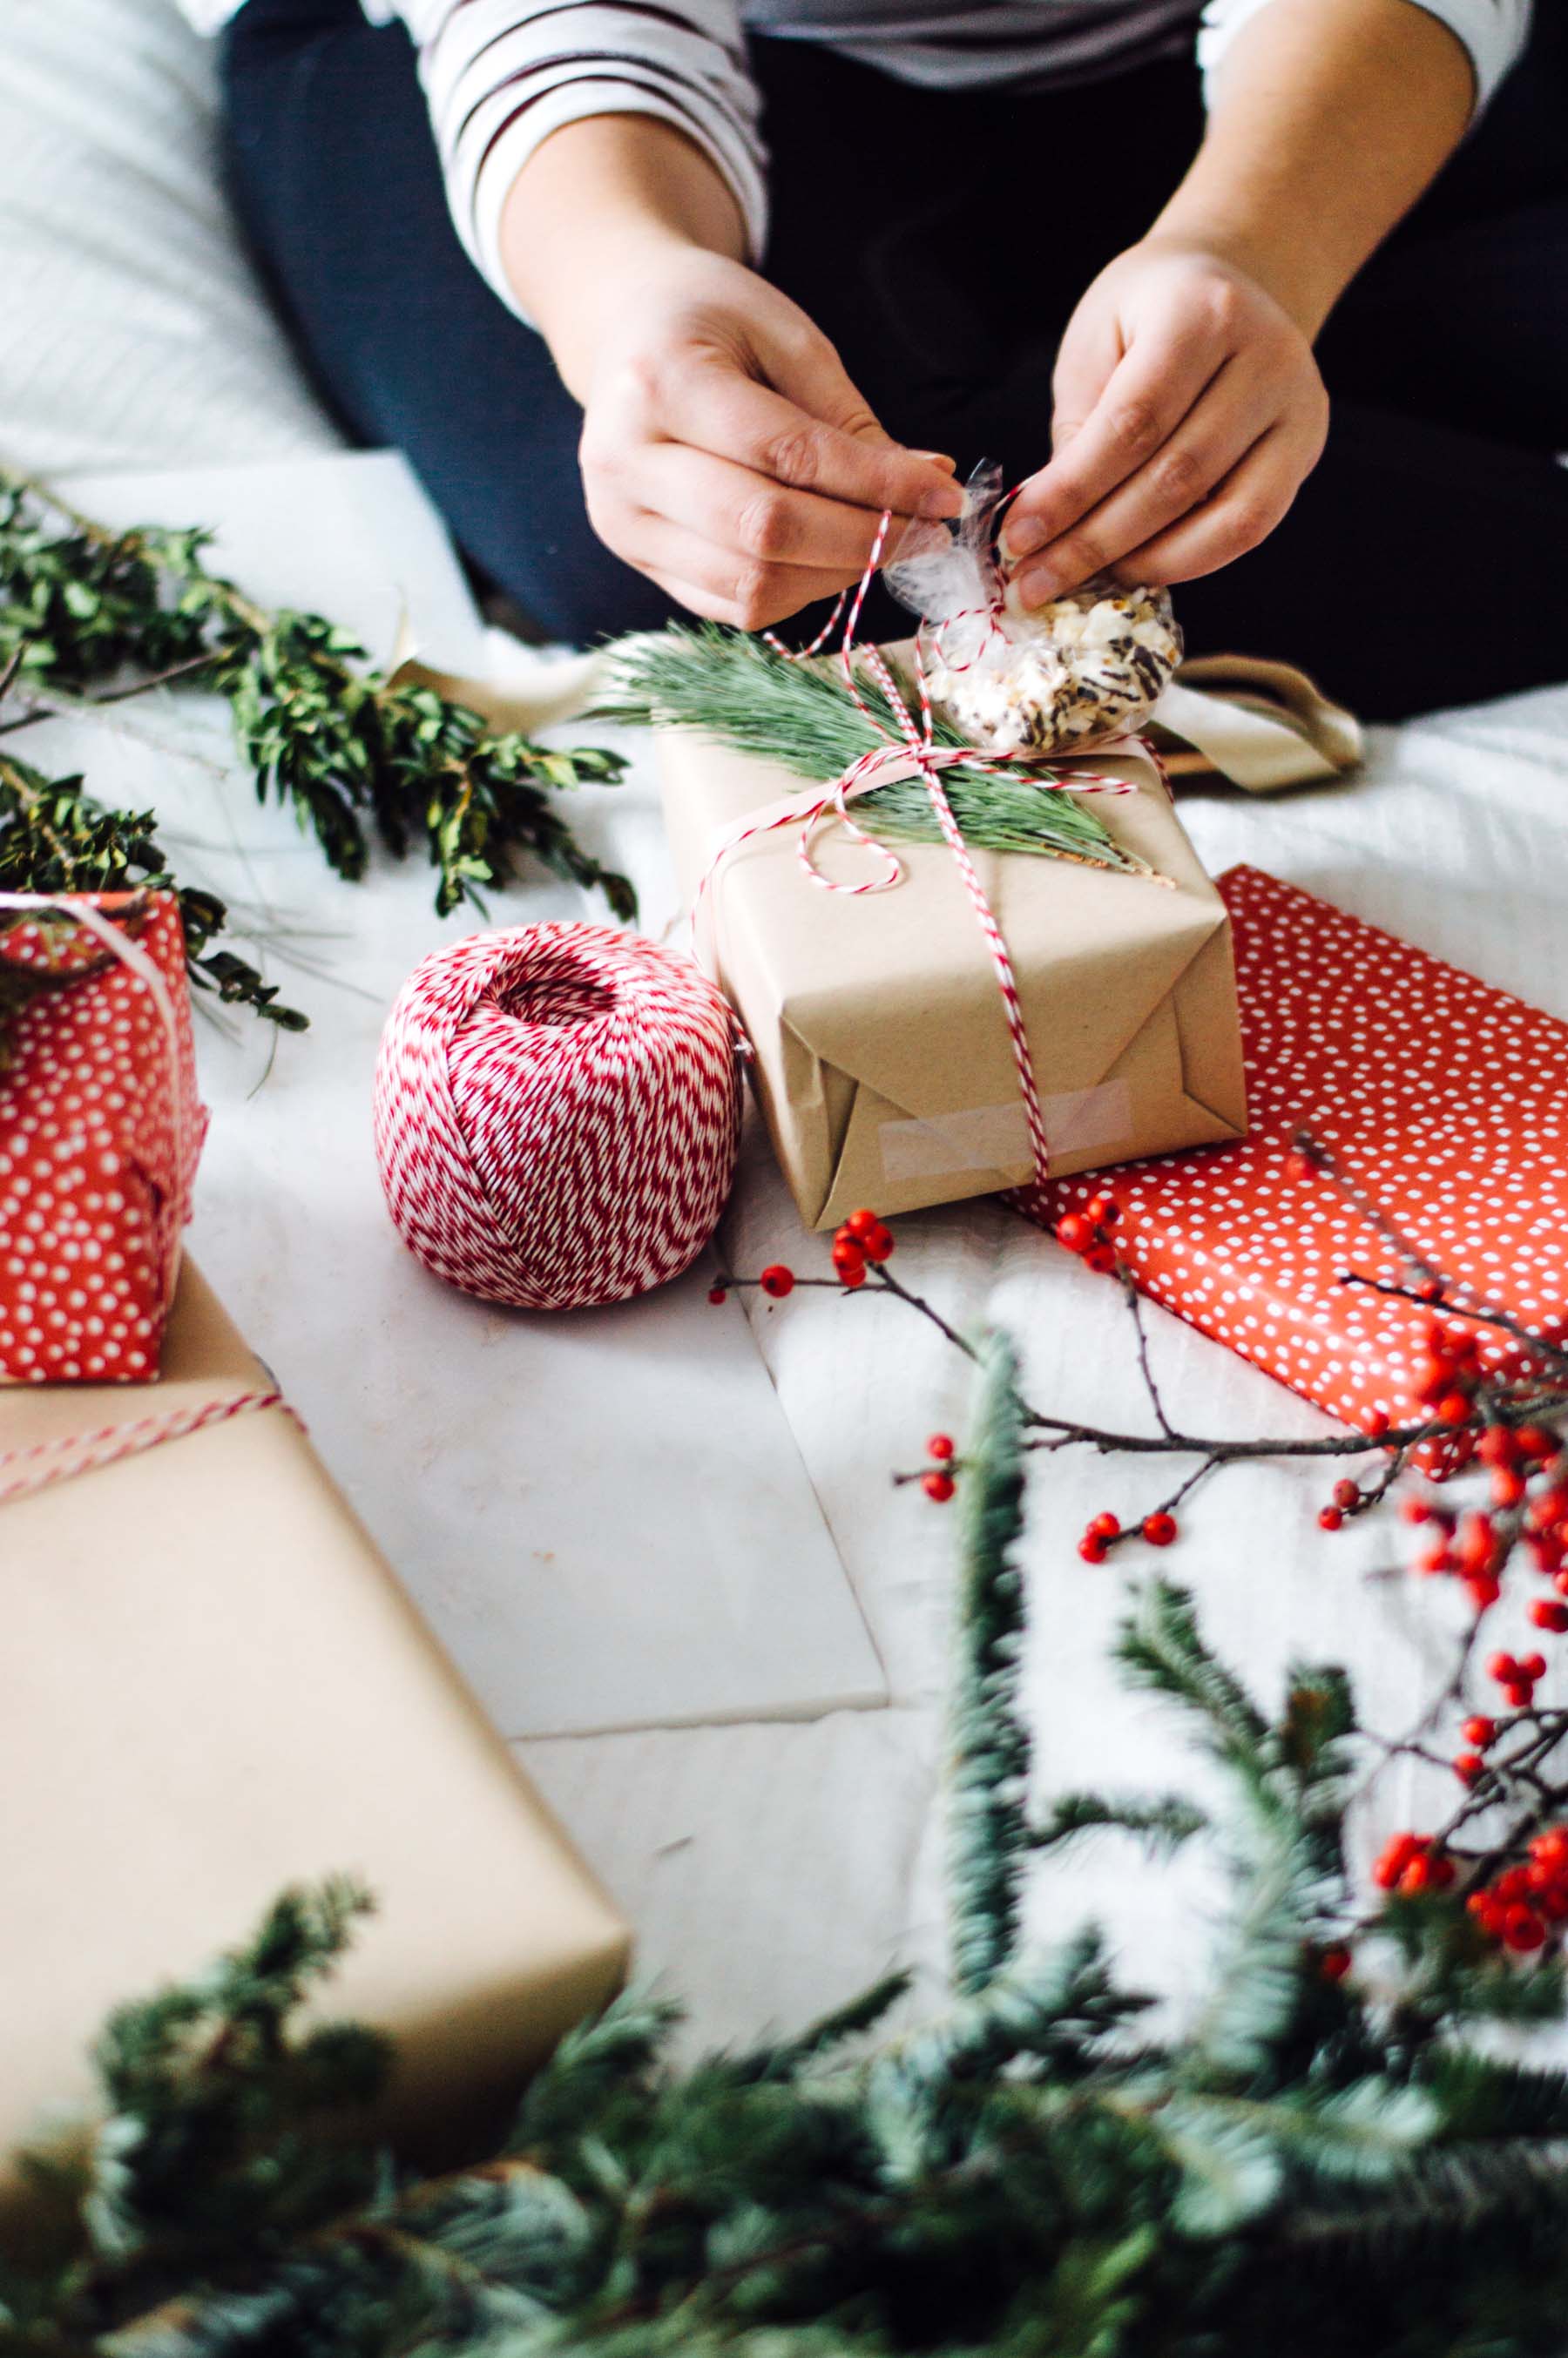 Still need to wrap up all your gifts? Use these holiday gift wrapping tips & tricks from @gabivalladares | bygabriella.co